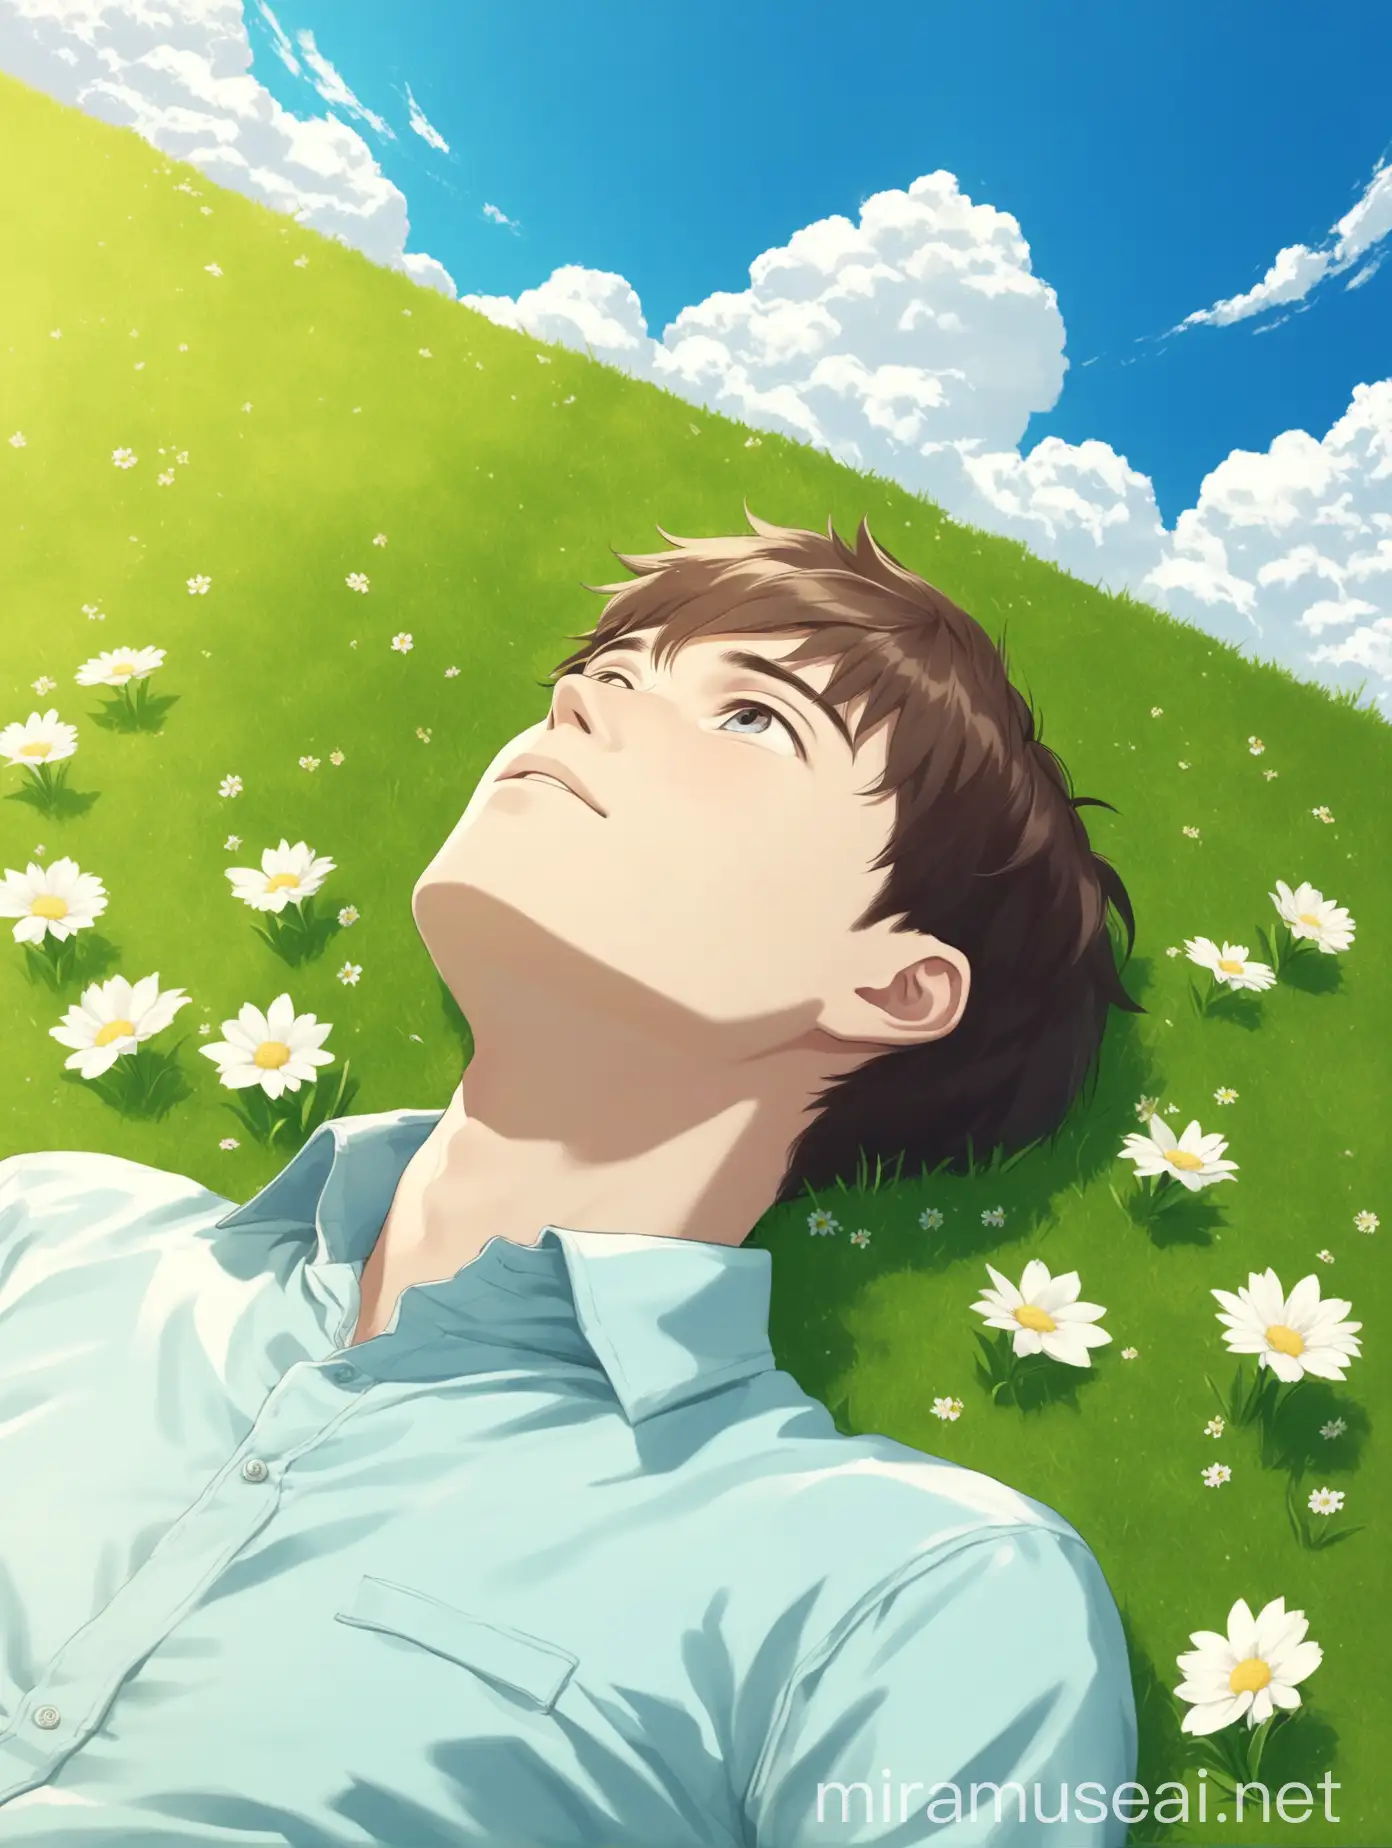 Relaxing Young Man Enjoying Spring Day Under Blue Sky and White Clouds